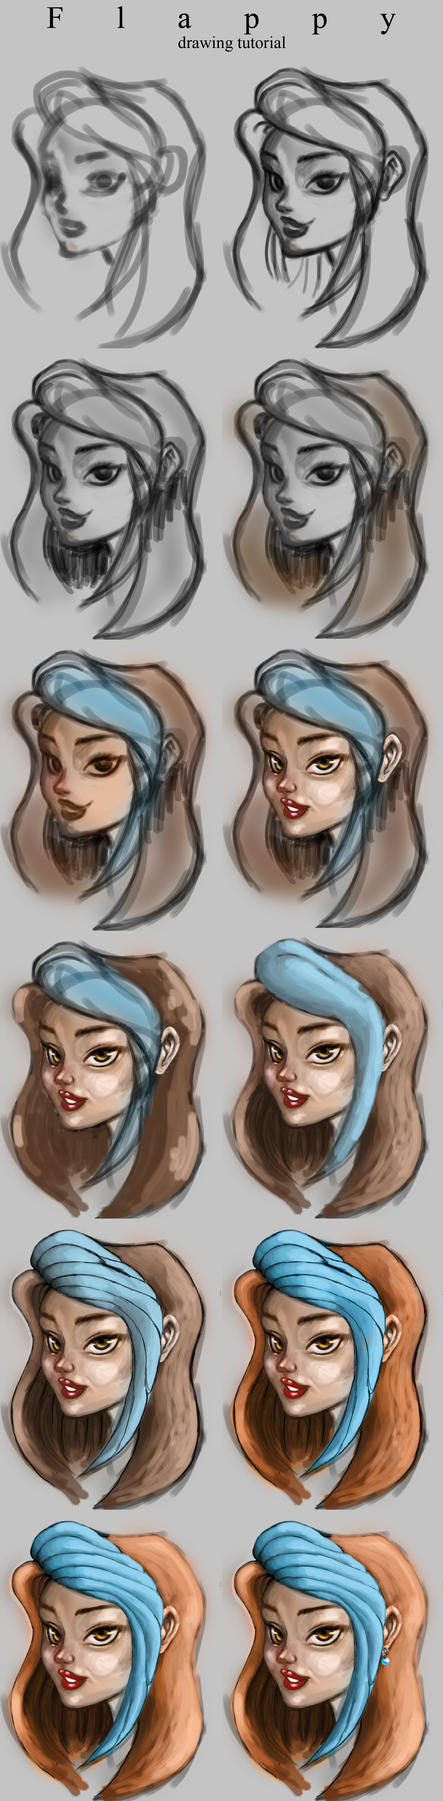 Digital Painting tutorial by Flappy-anass on DeviantArt